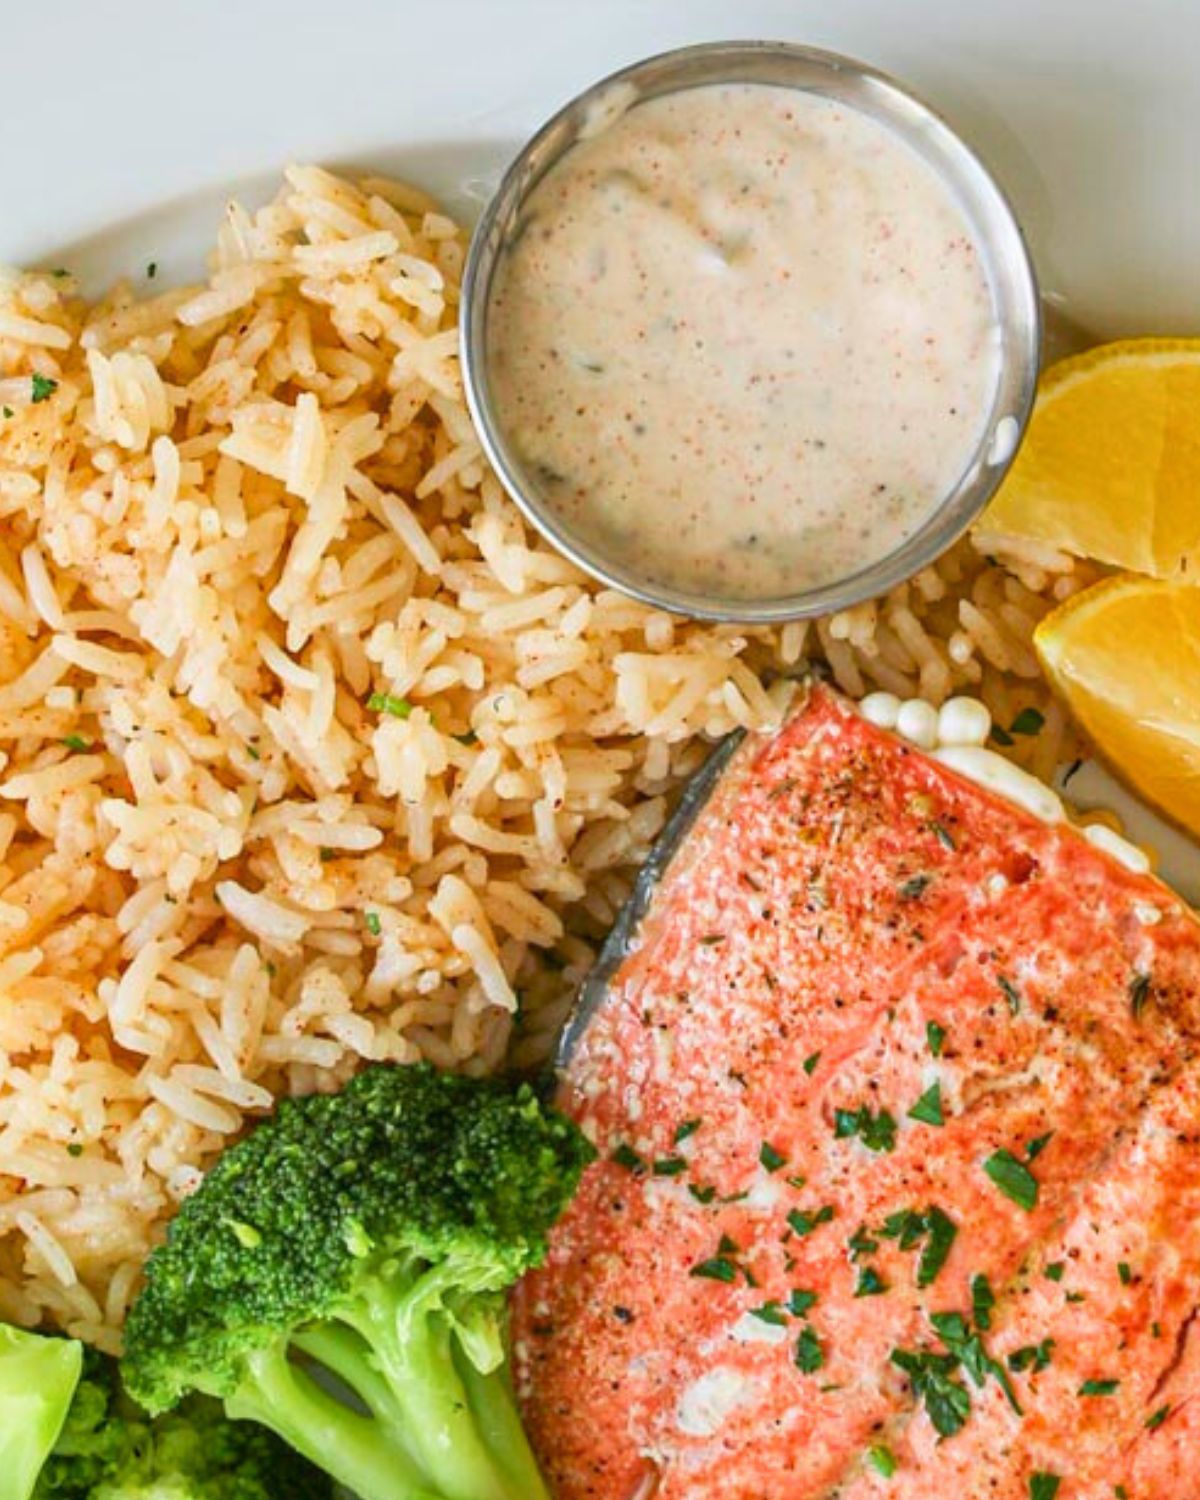 remoulade in a small silver cup on a plate of fish, rice, and veggies.